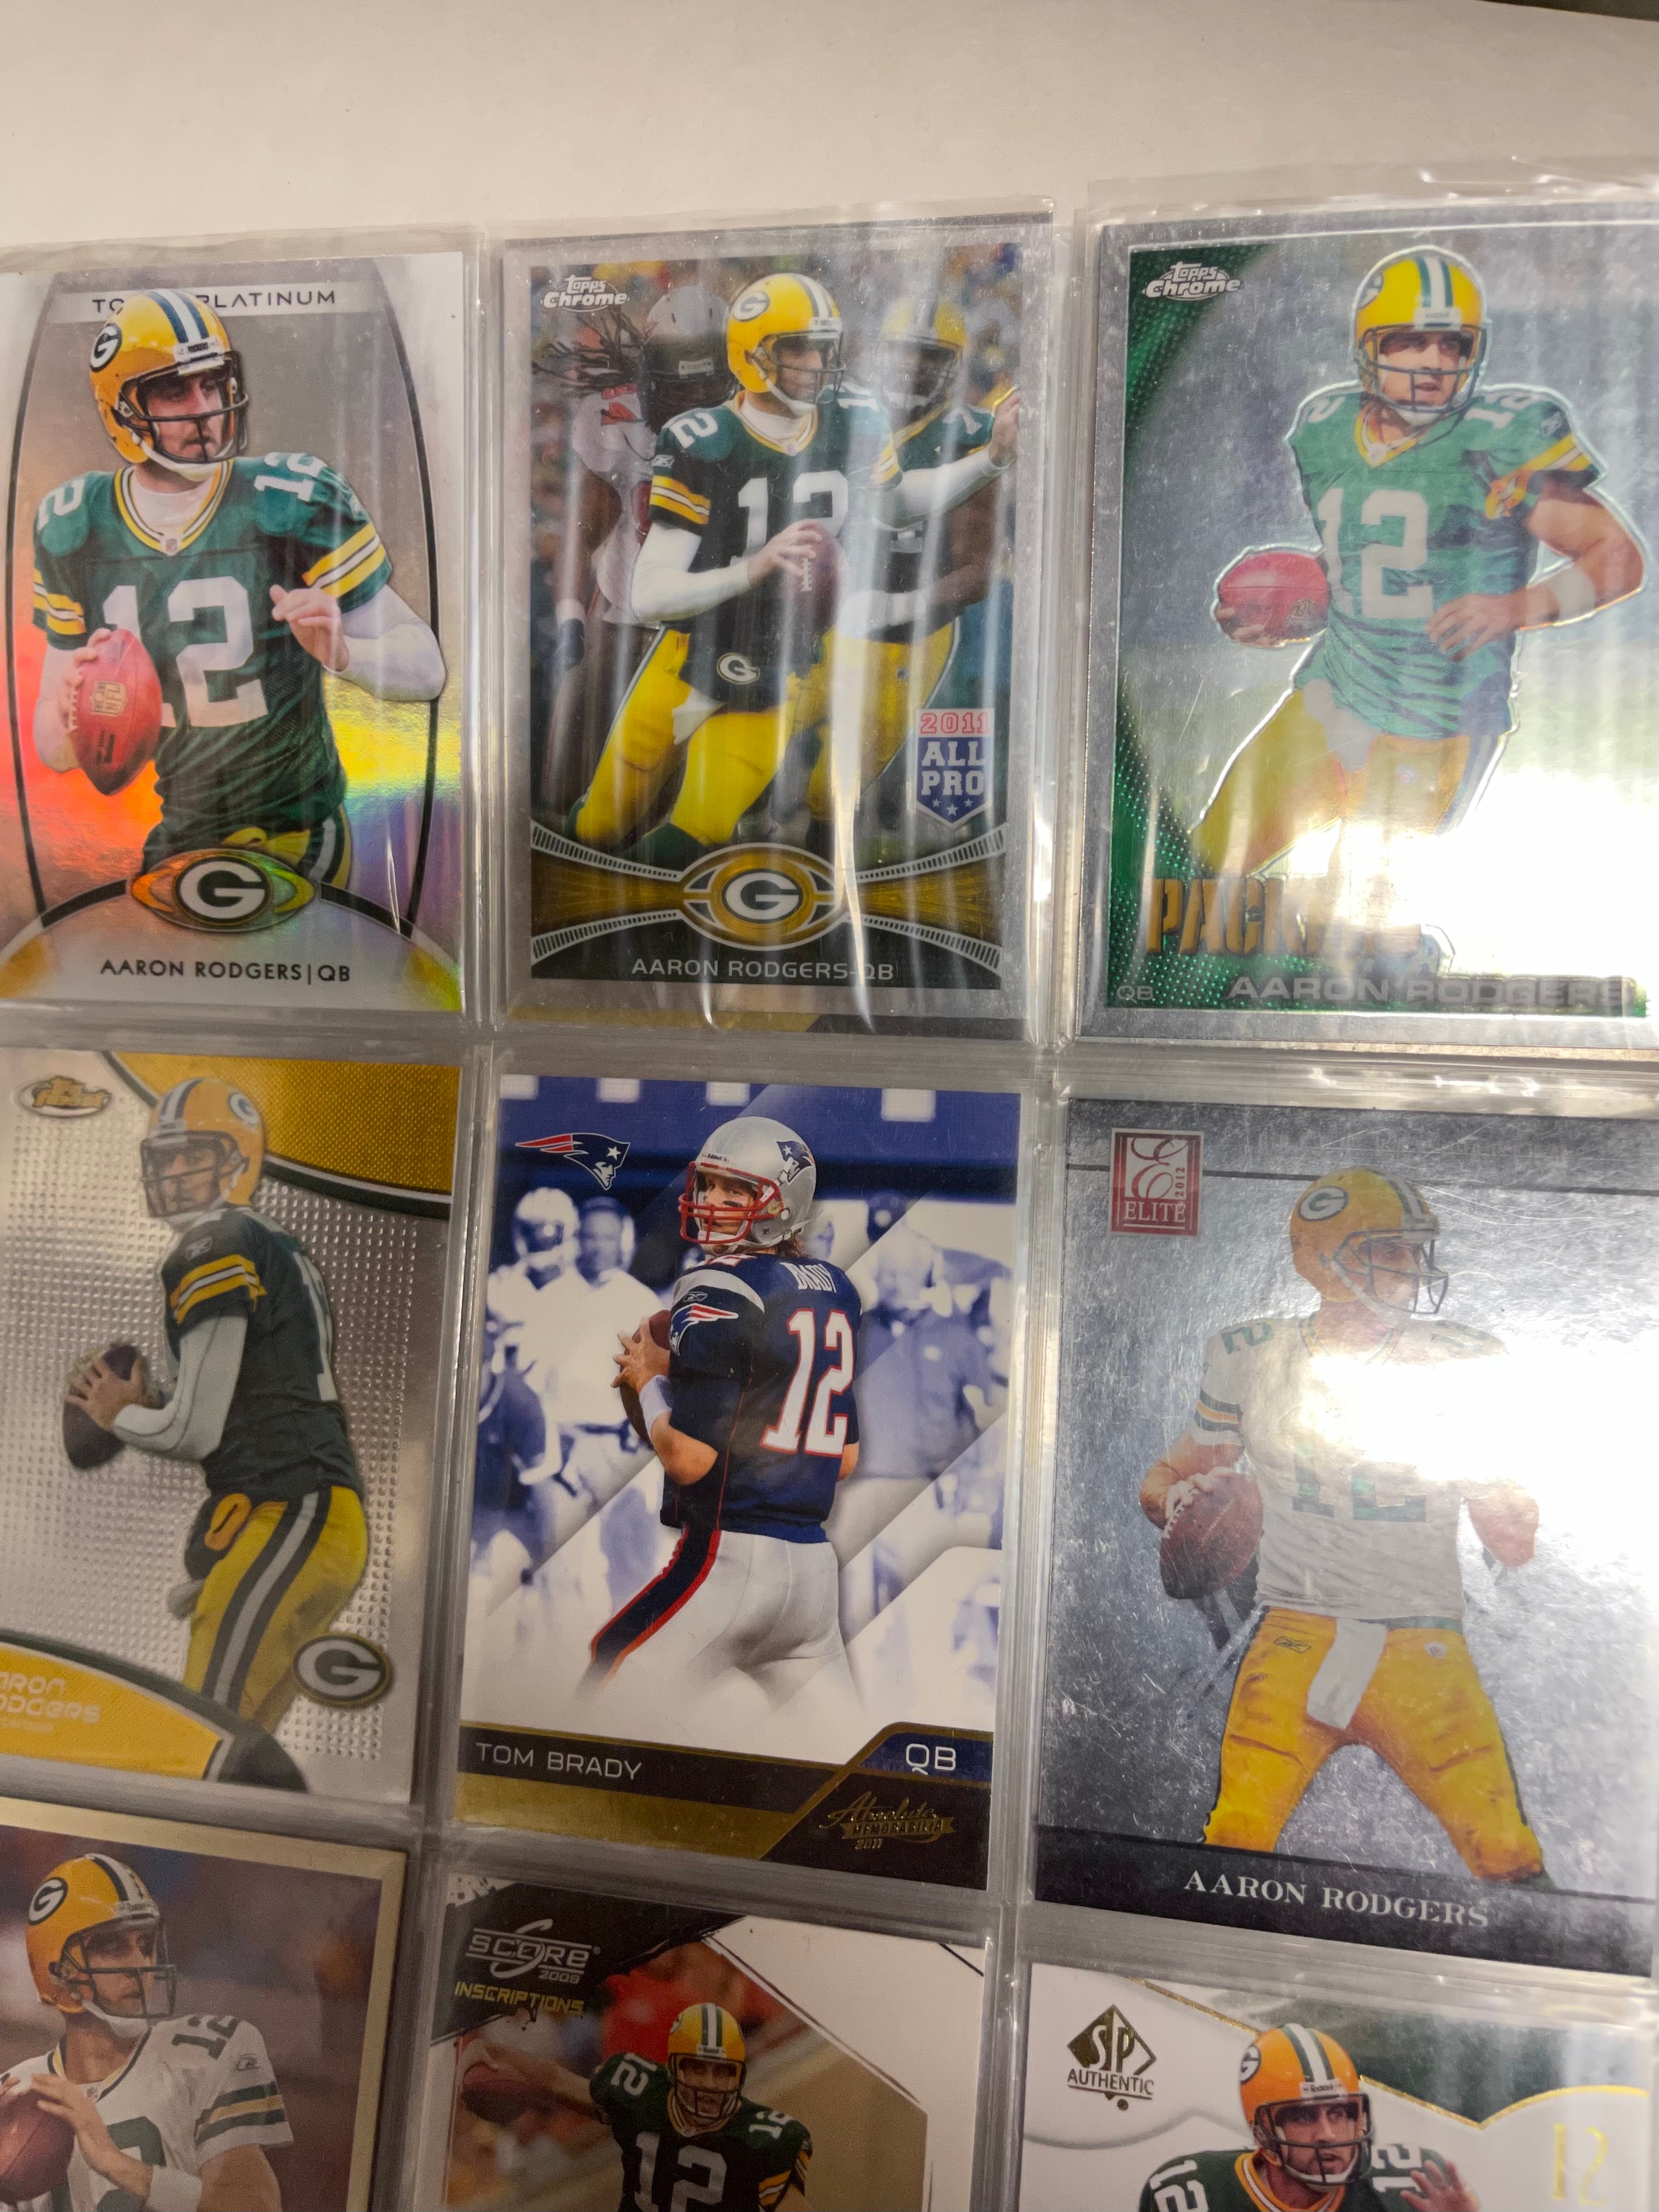 Aaron Rodgers football legend 32 count cards lot deal